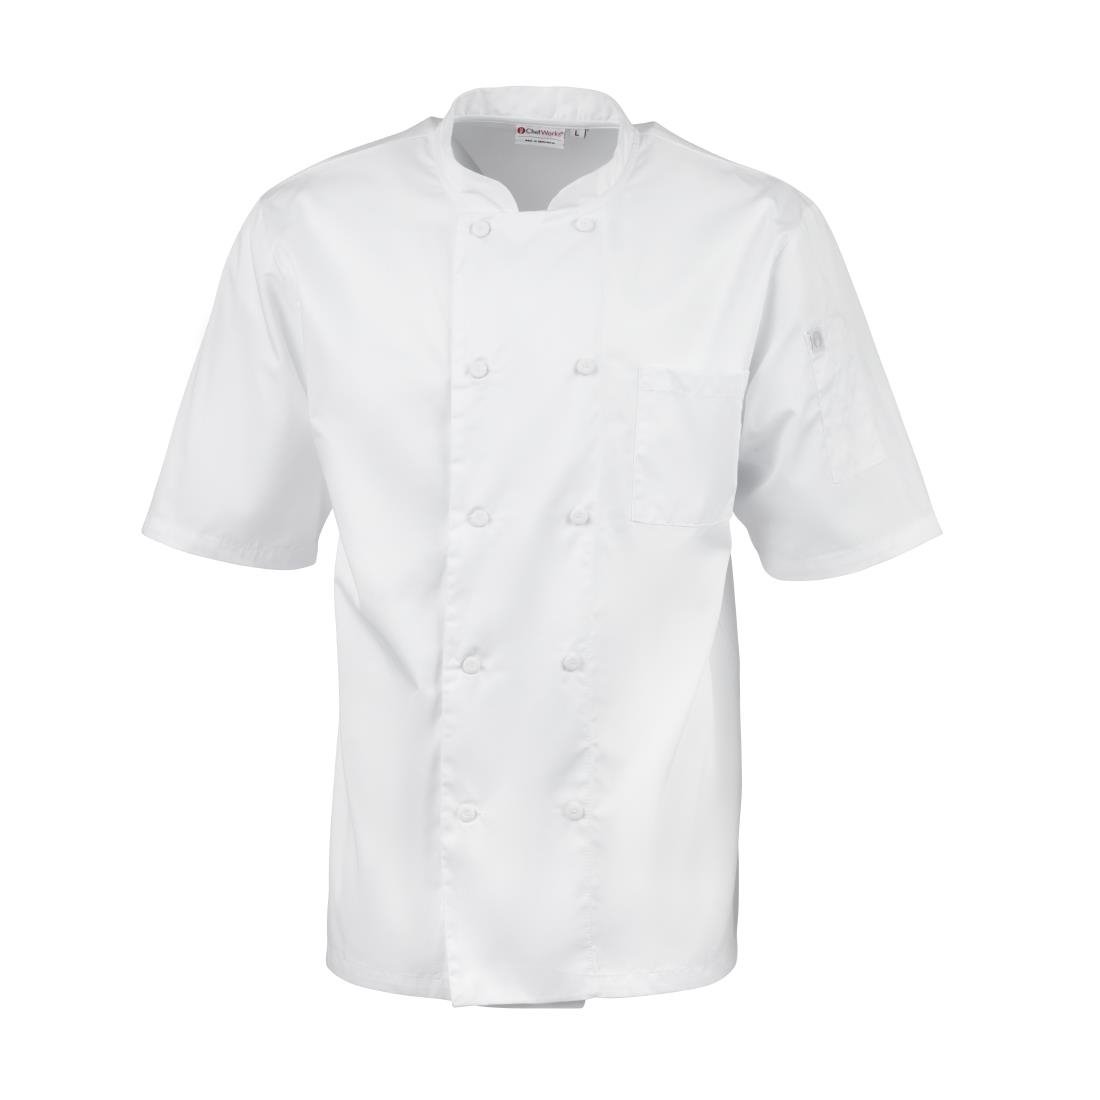 A914-XS Chefs Works Montreal Cool Vent Unisex Short Sleeve Chefs Jacket White XS